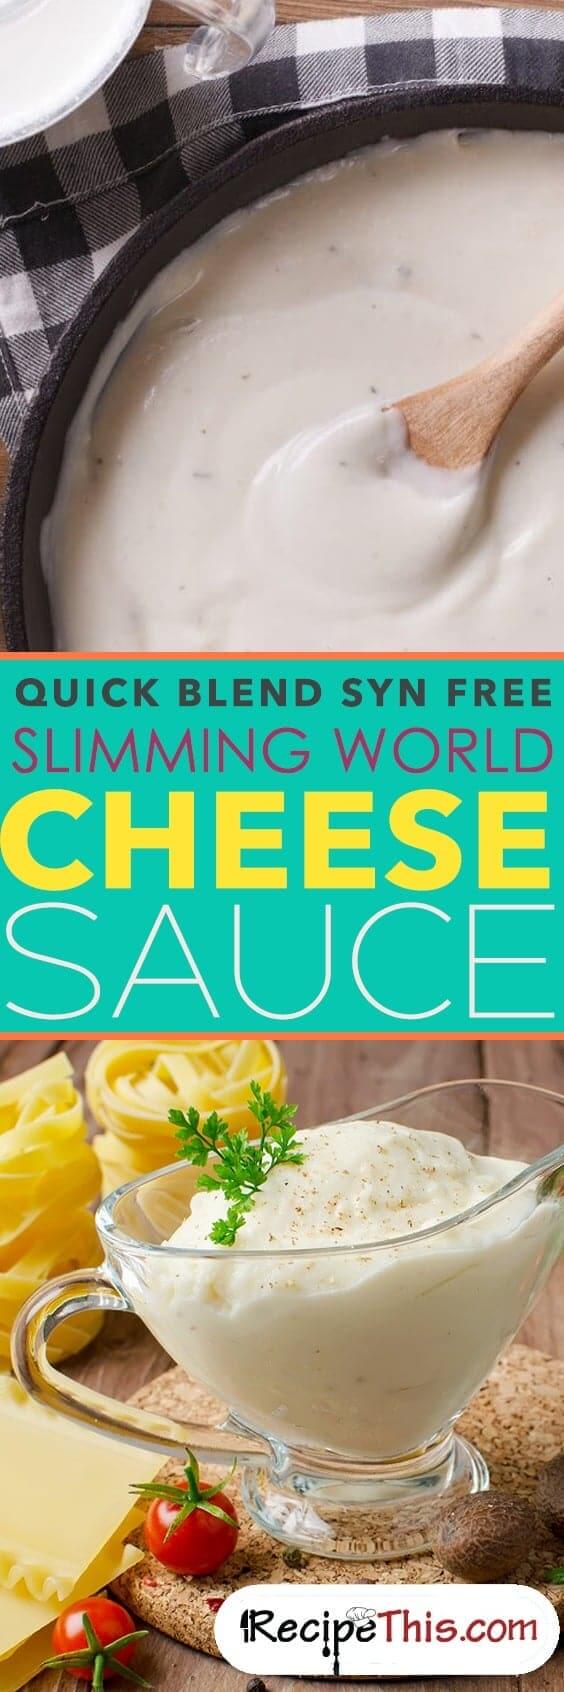 Quick Blend Syn Free Slimming World Cheese Sauce